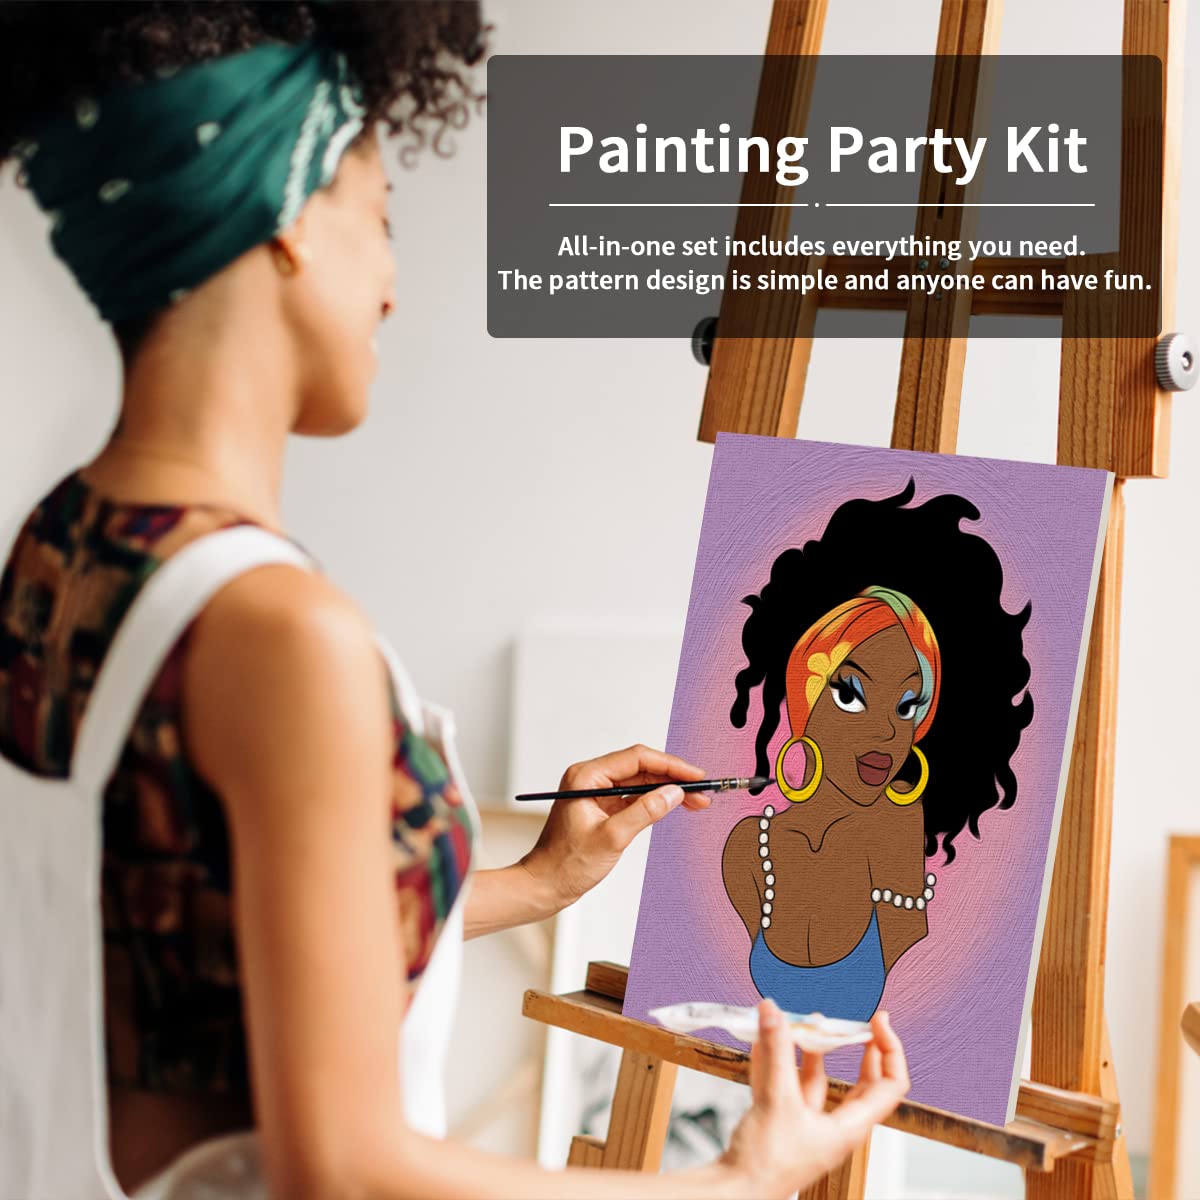  13 Pcs Sip And Paint Kit Couple Painting Kit Supplies Afro  King Queen Canvas Painting Art Painting Set Pre Drawn Stretch Canvas Kit  For Couple Date Night Party